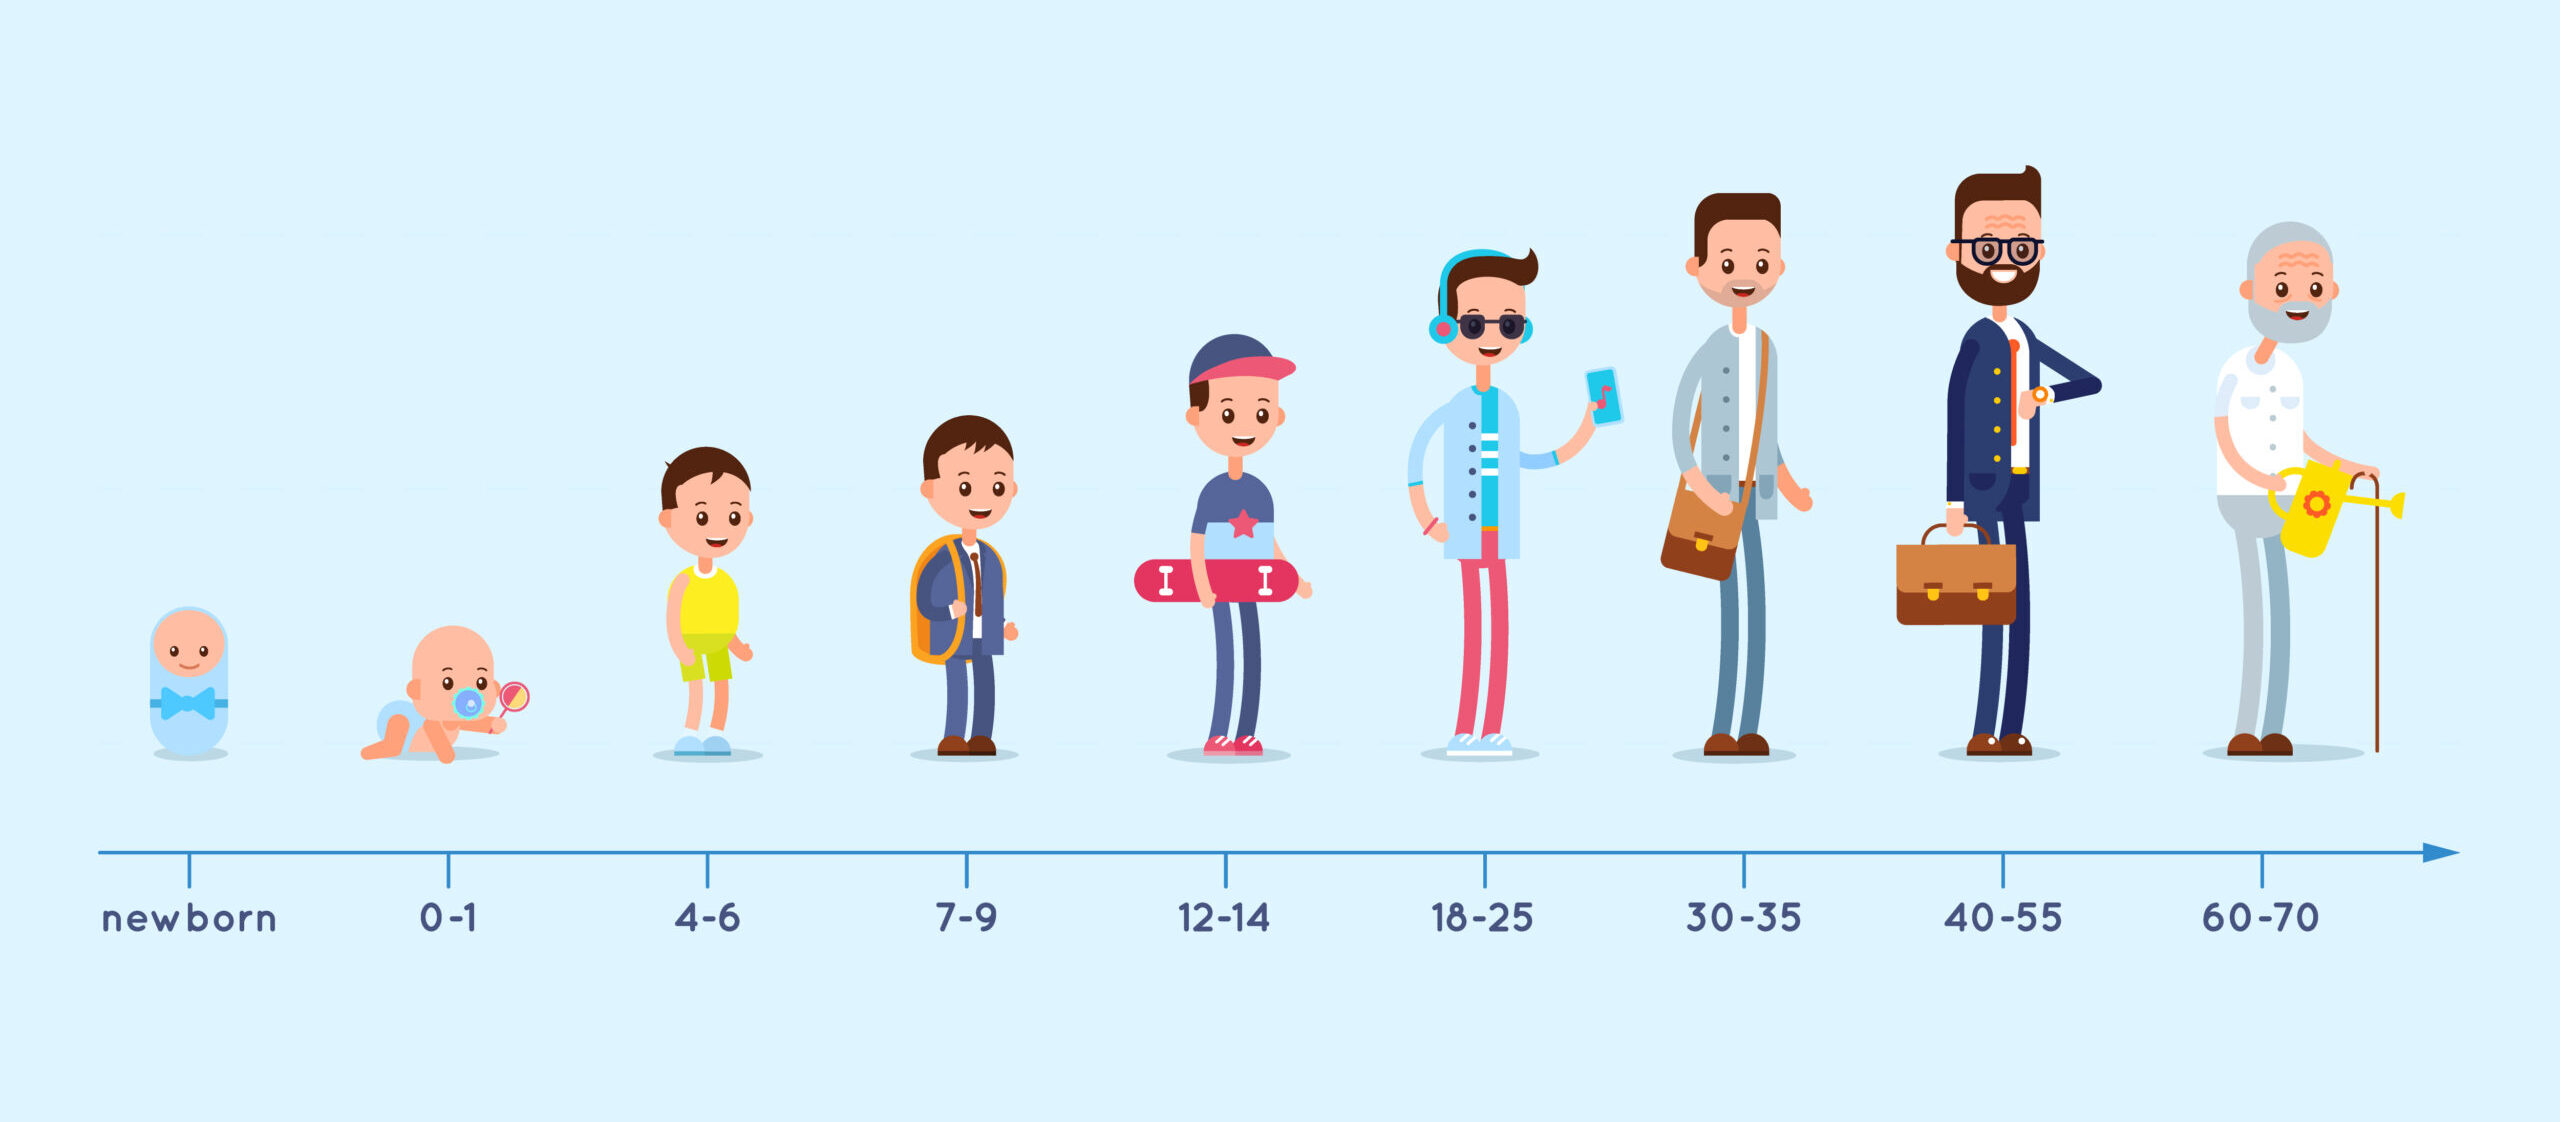 diabetes chart by age